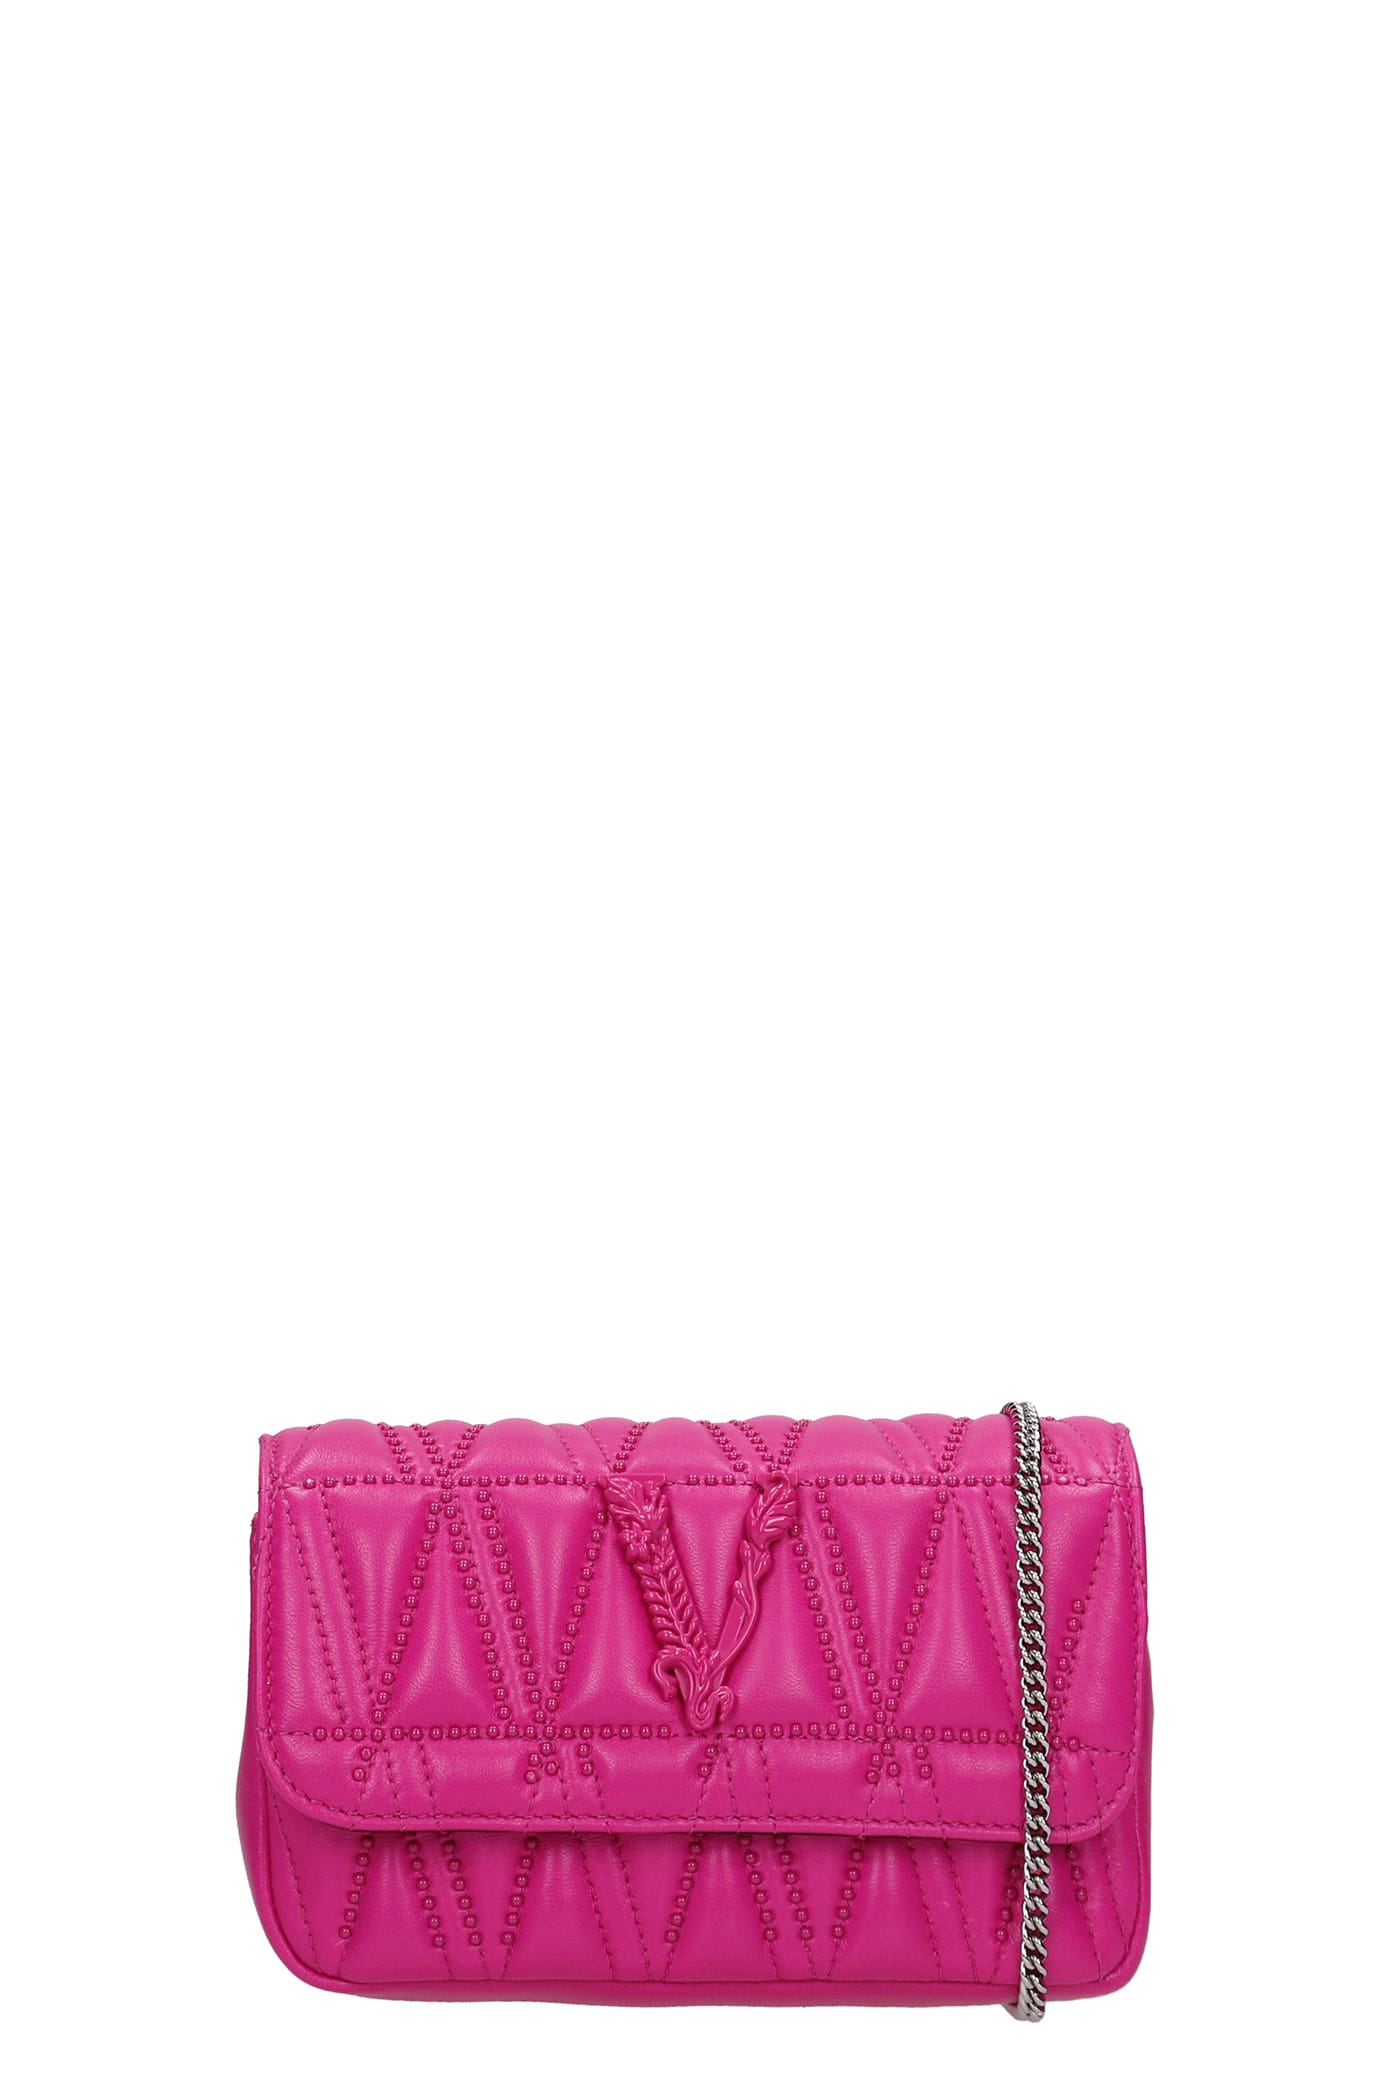 Versace Shoulder Bag In Fuxia Leather